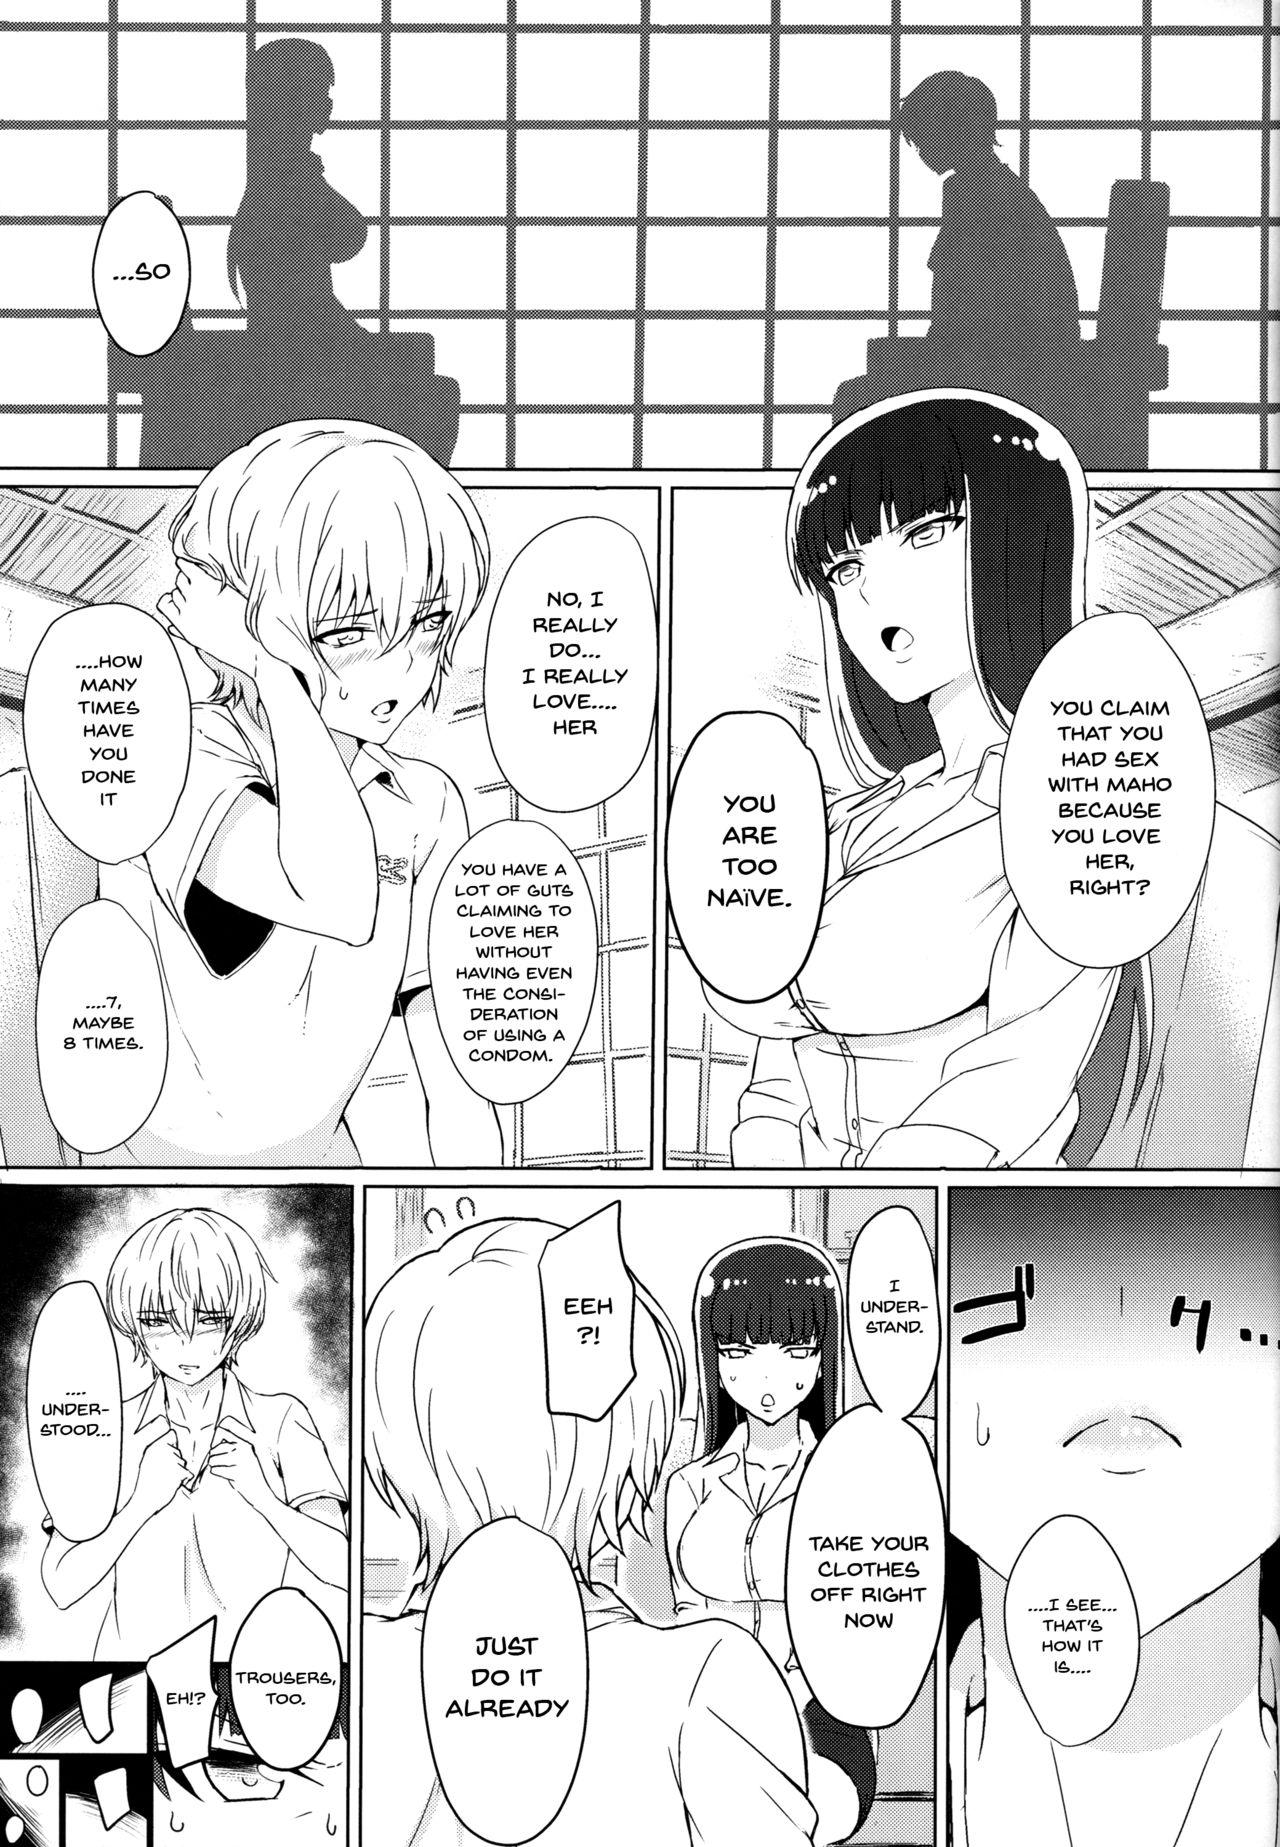 Exhibitionist Wakai Otoko to Shihox | Doing It With a Younger Guy - Girls und panzer Student - Page 4